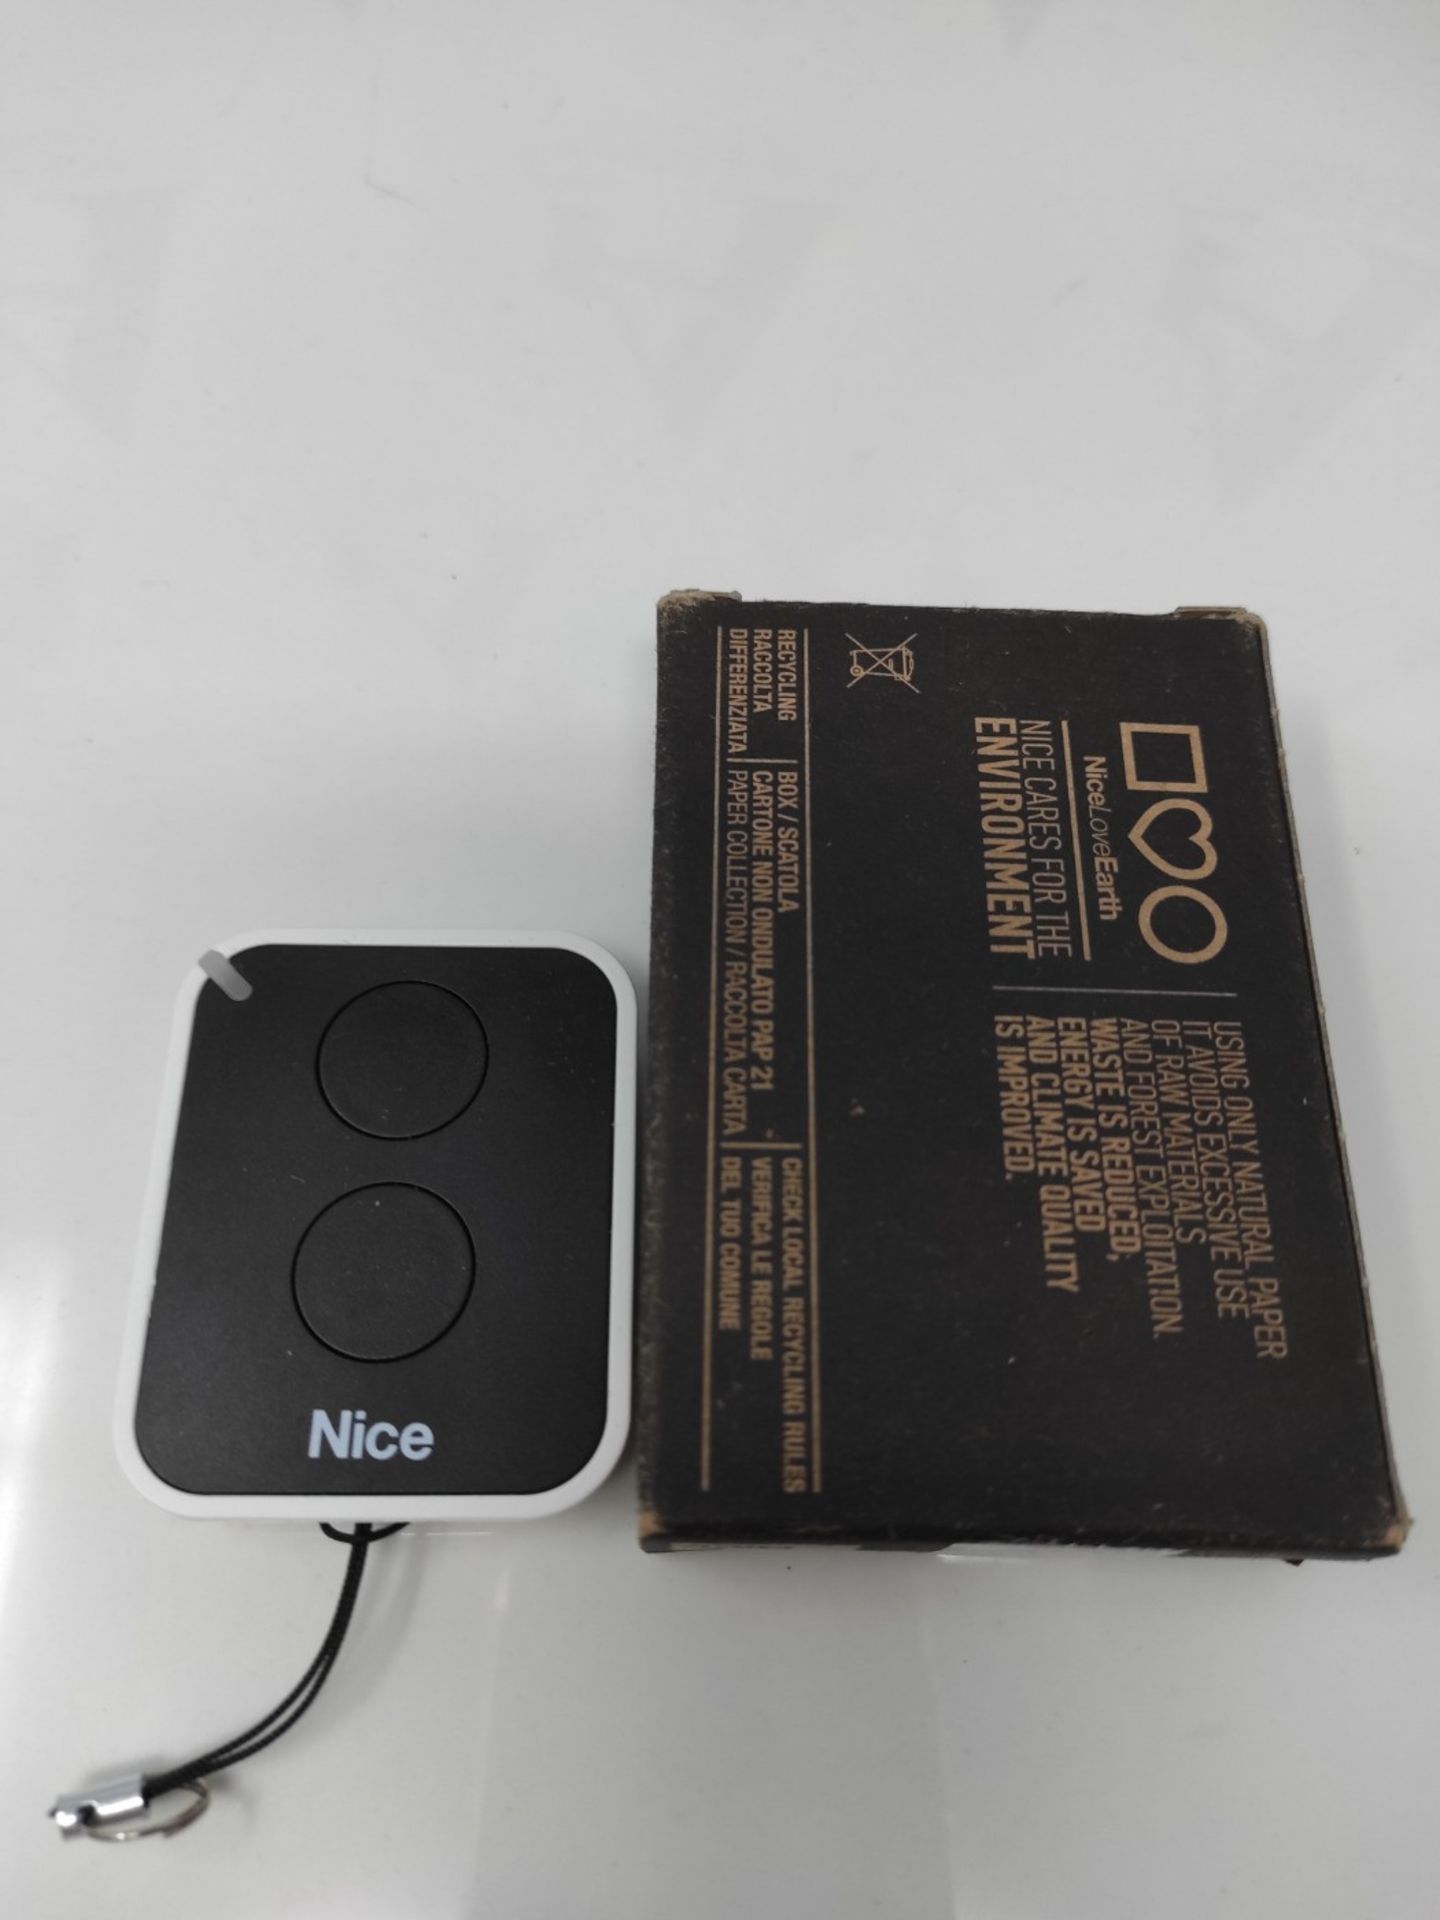 NICE - Nice Era ONE2 remote control, 2 channels, 433.92 MHz, Black/White, ON2 - Image 2 of 2